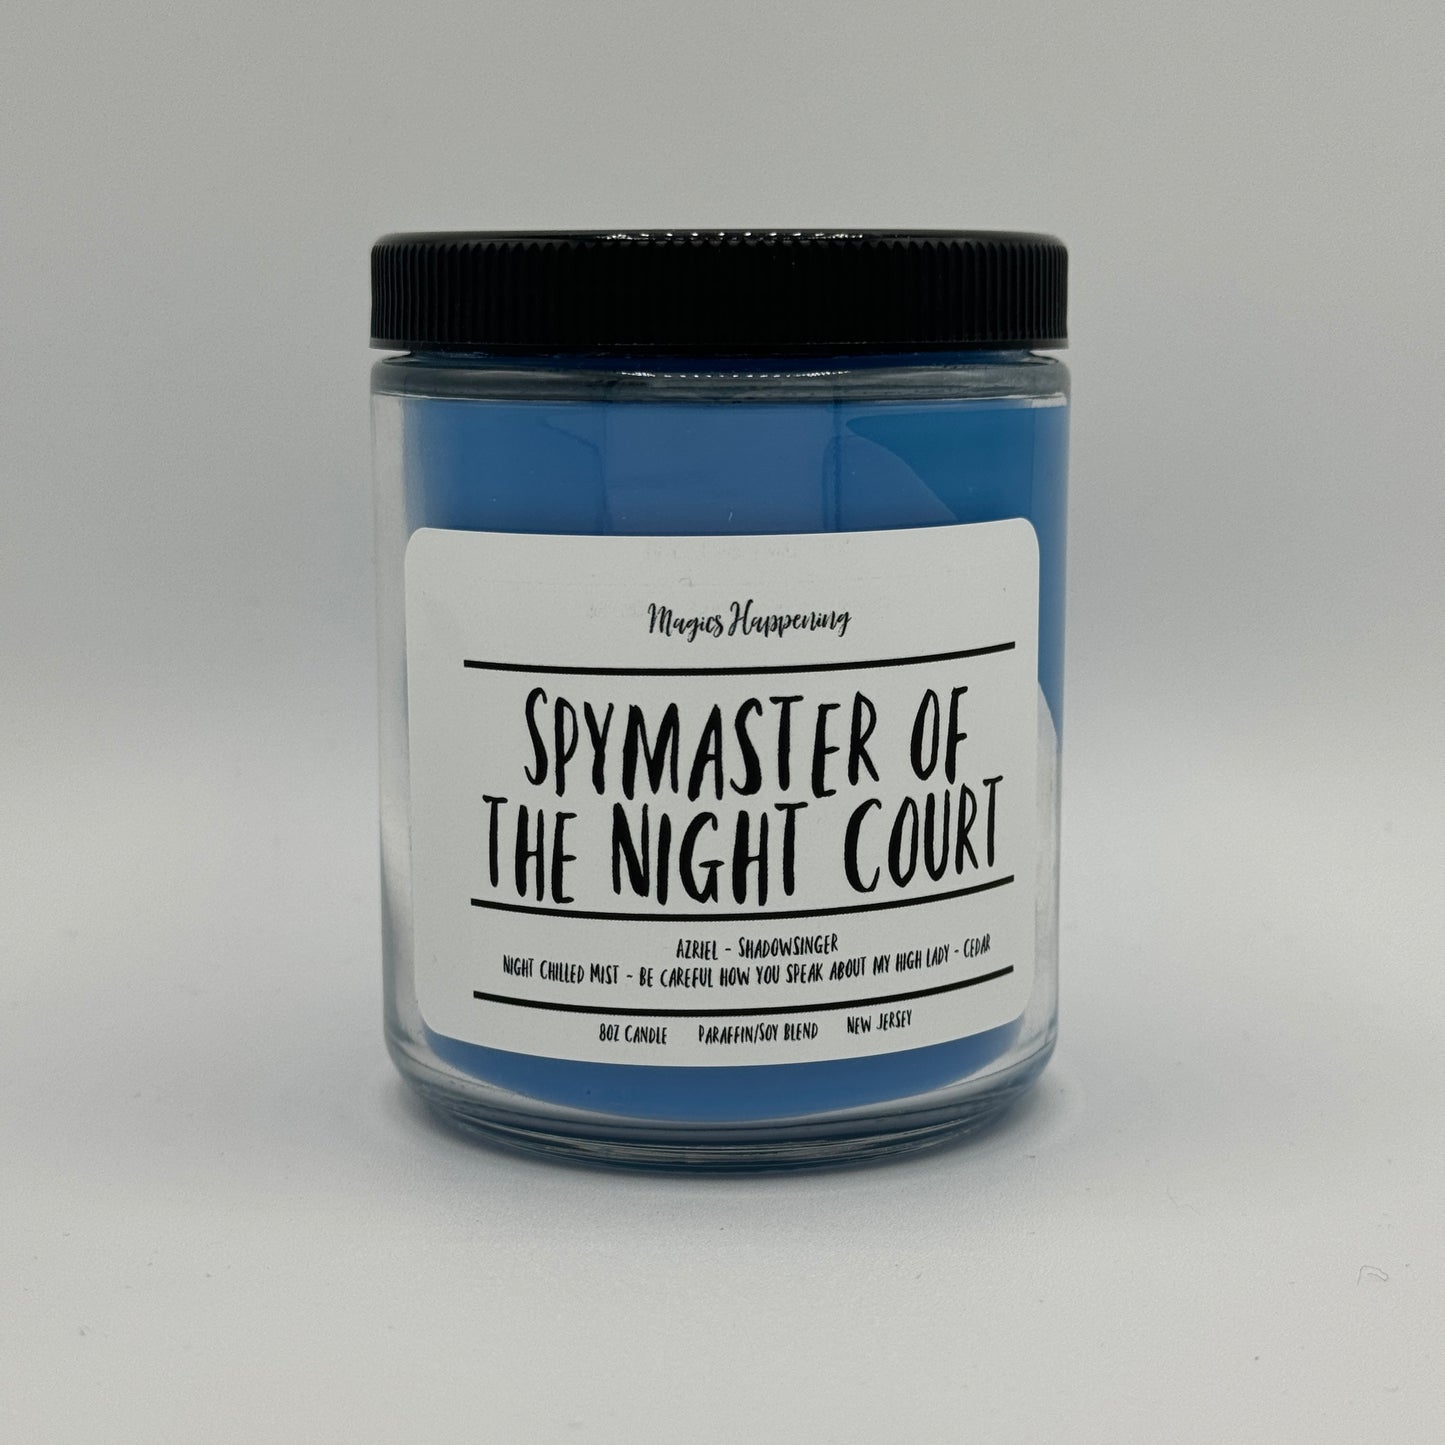 Spymaster of the Night Court